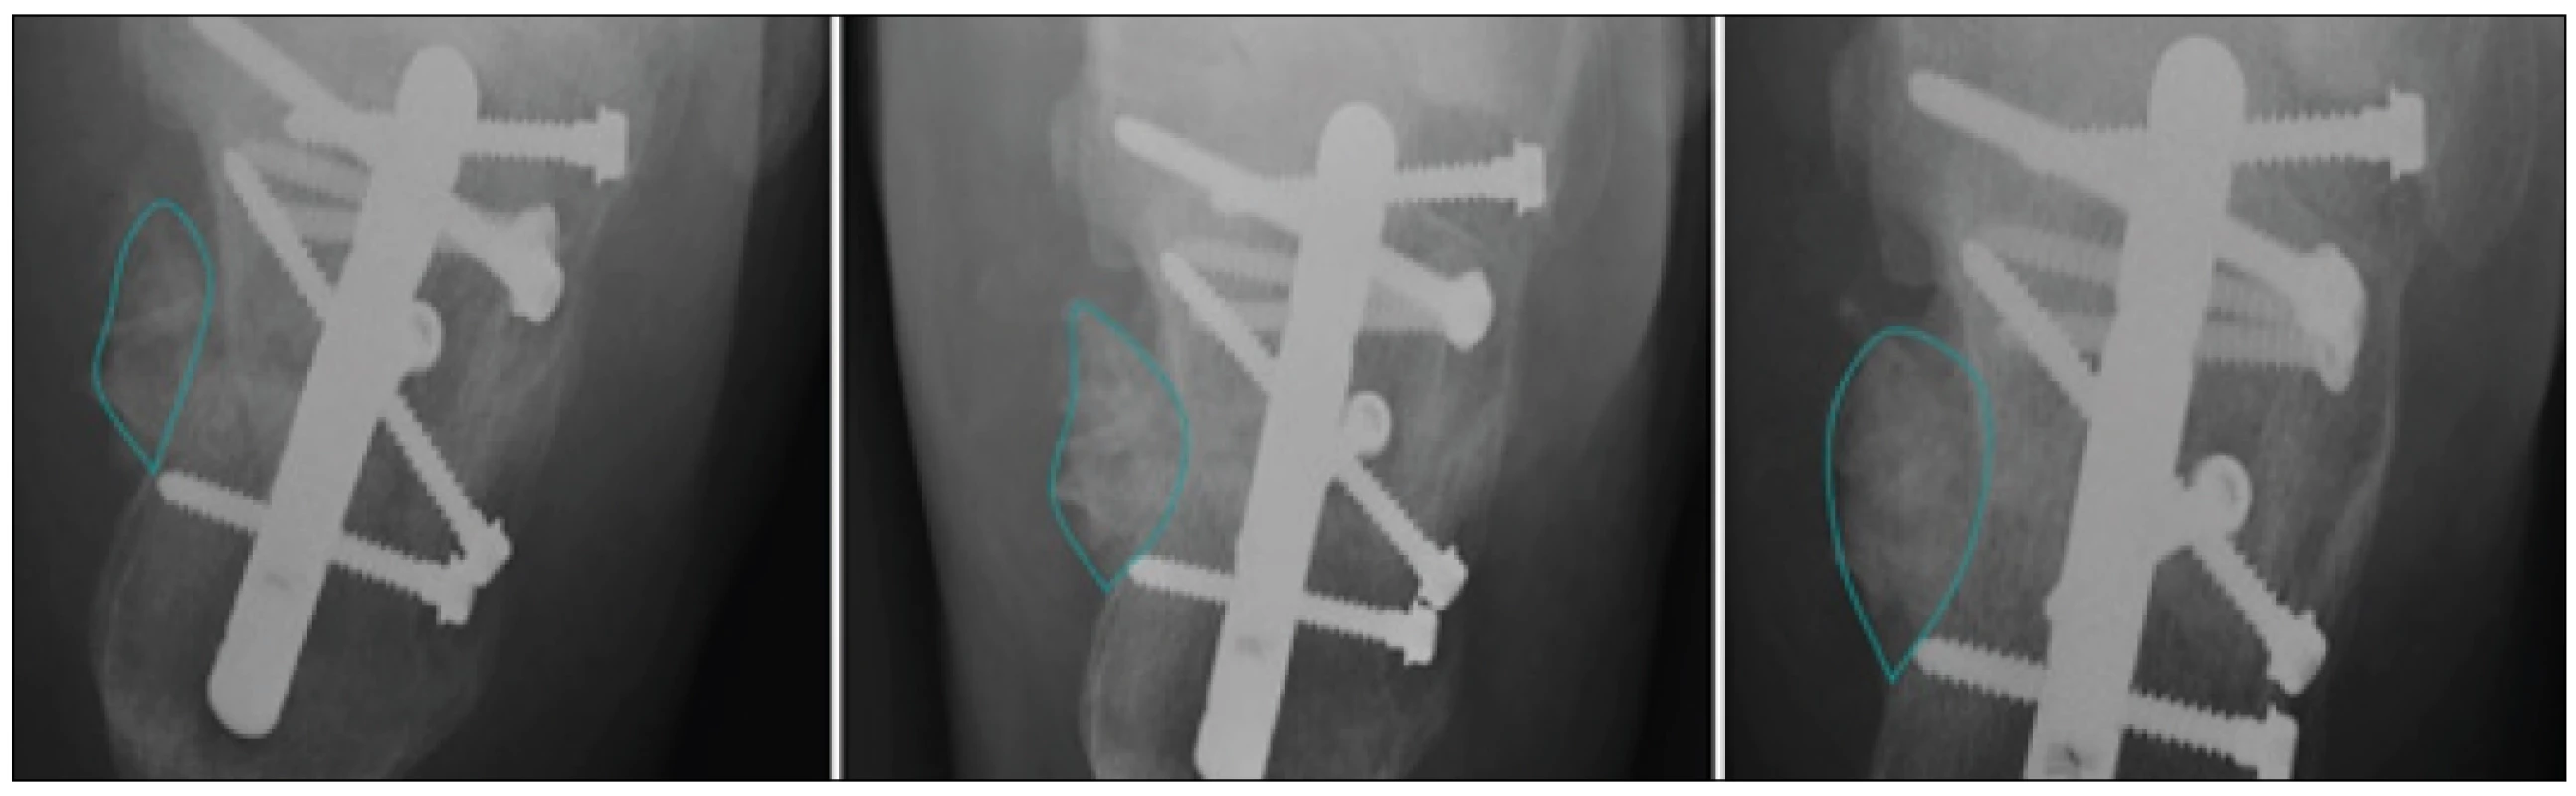 Application of the active contour method (green curve) that detect the periosteal callus area in clinical X-ray image data